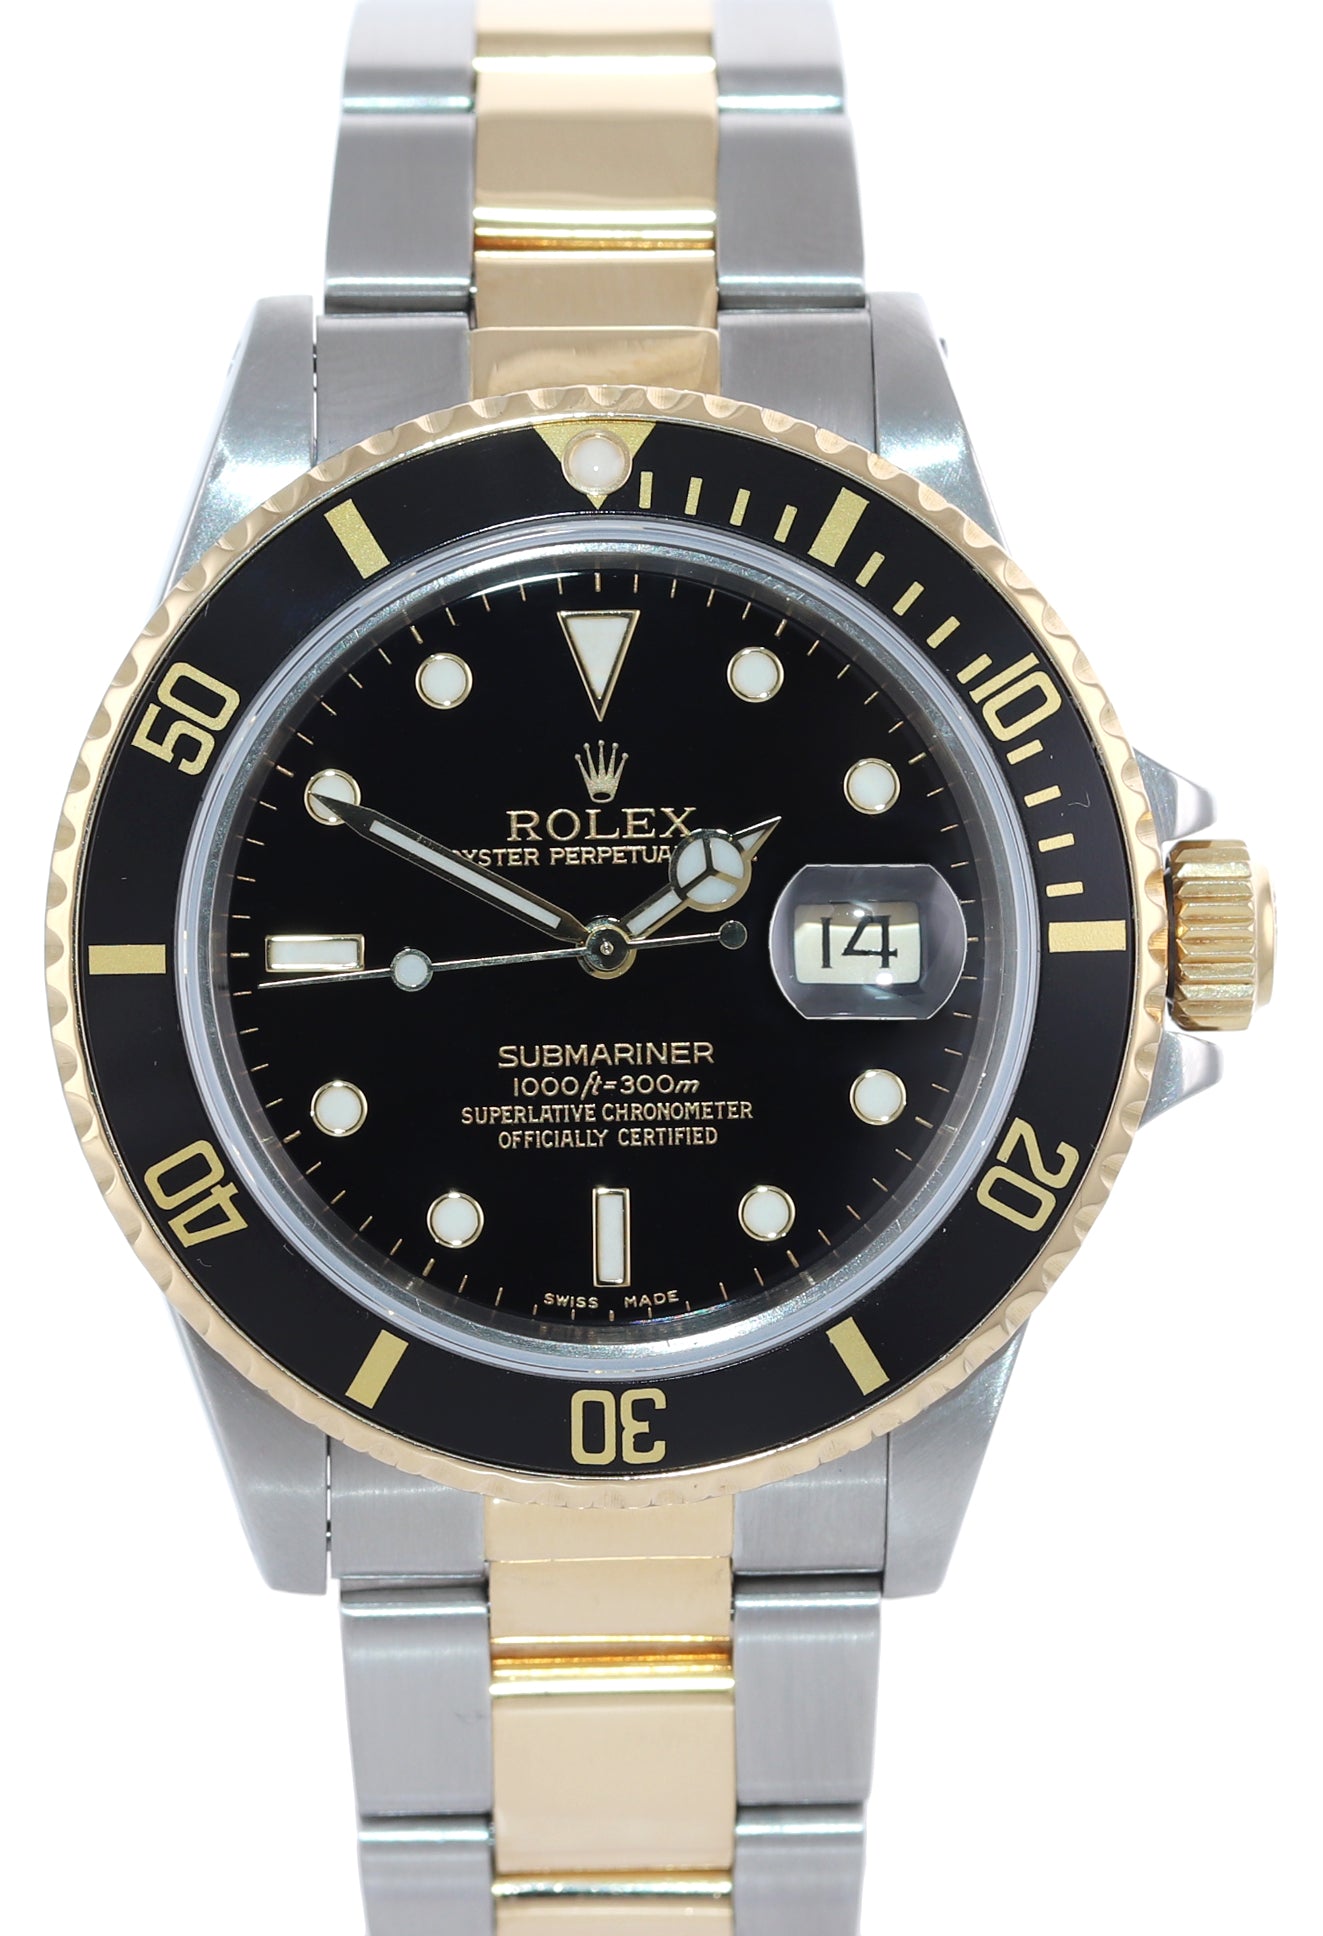 Rolex Submariner Date 16803 18K Gold Steel Two Tone Black Dial Watch Box